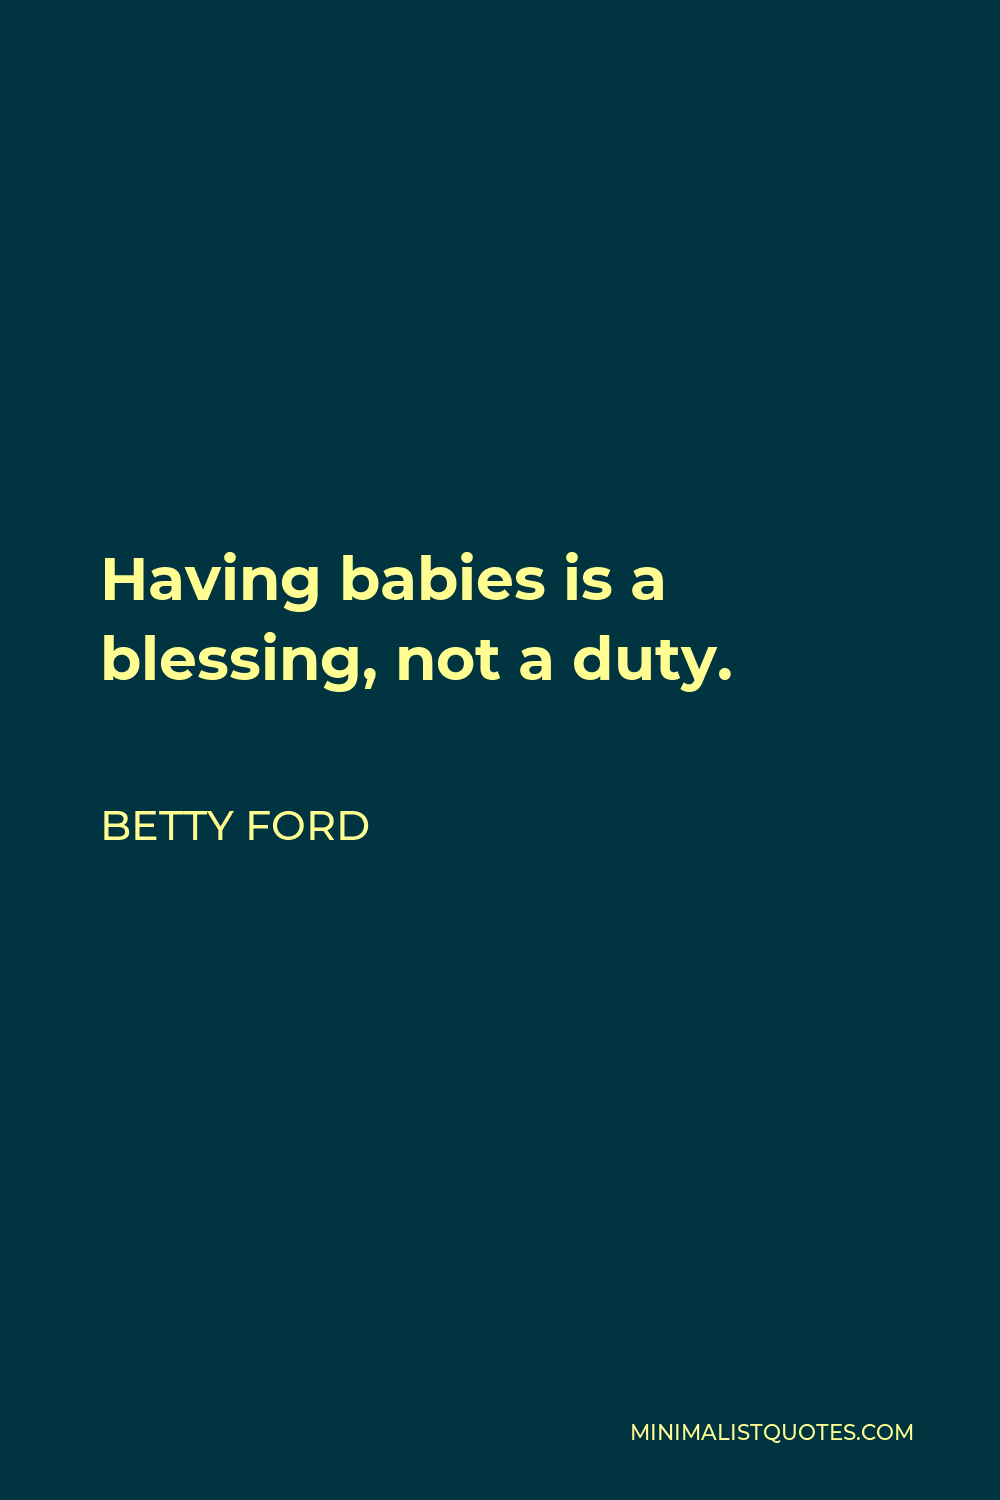 Betty Ford Quote - Having babies is a blessing, not a duty.